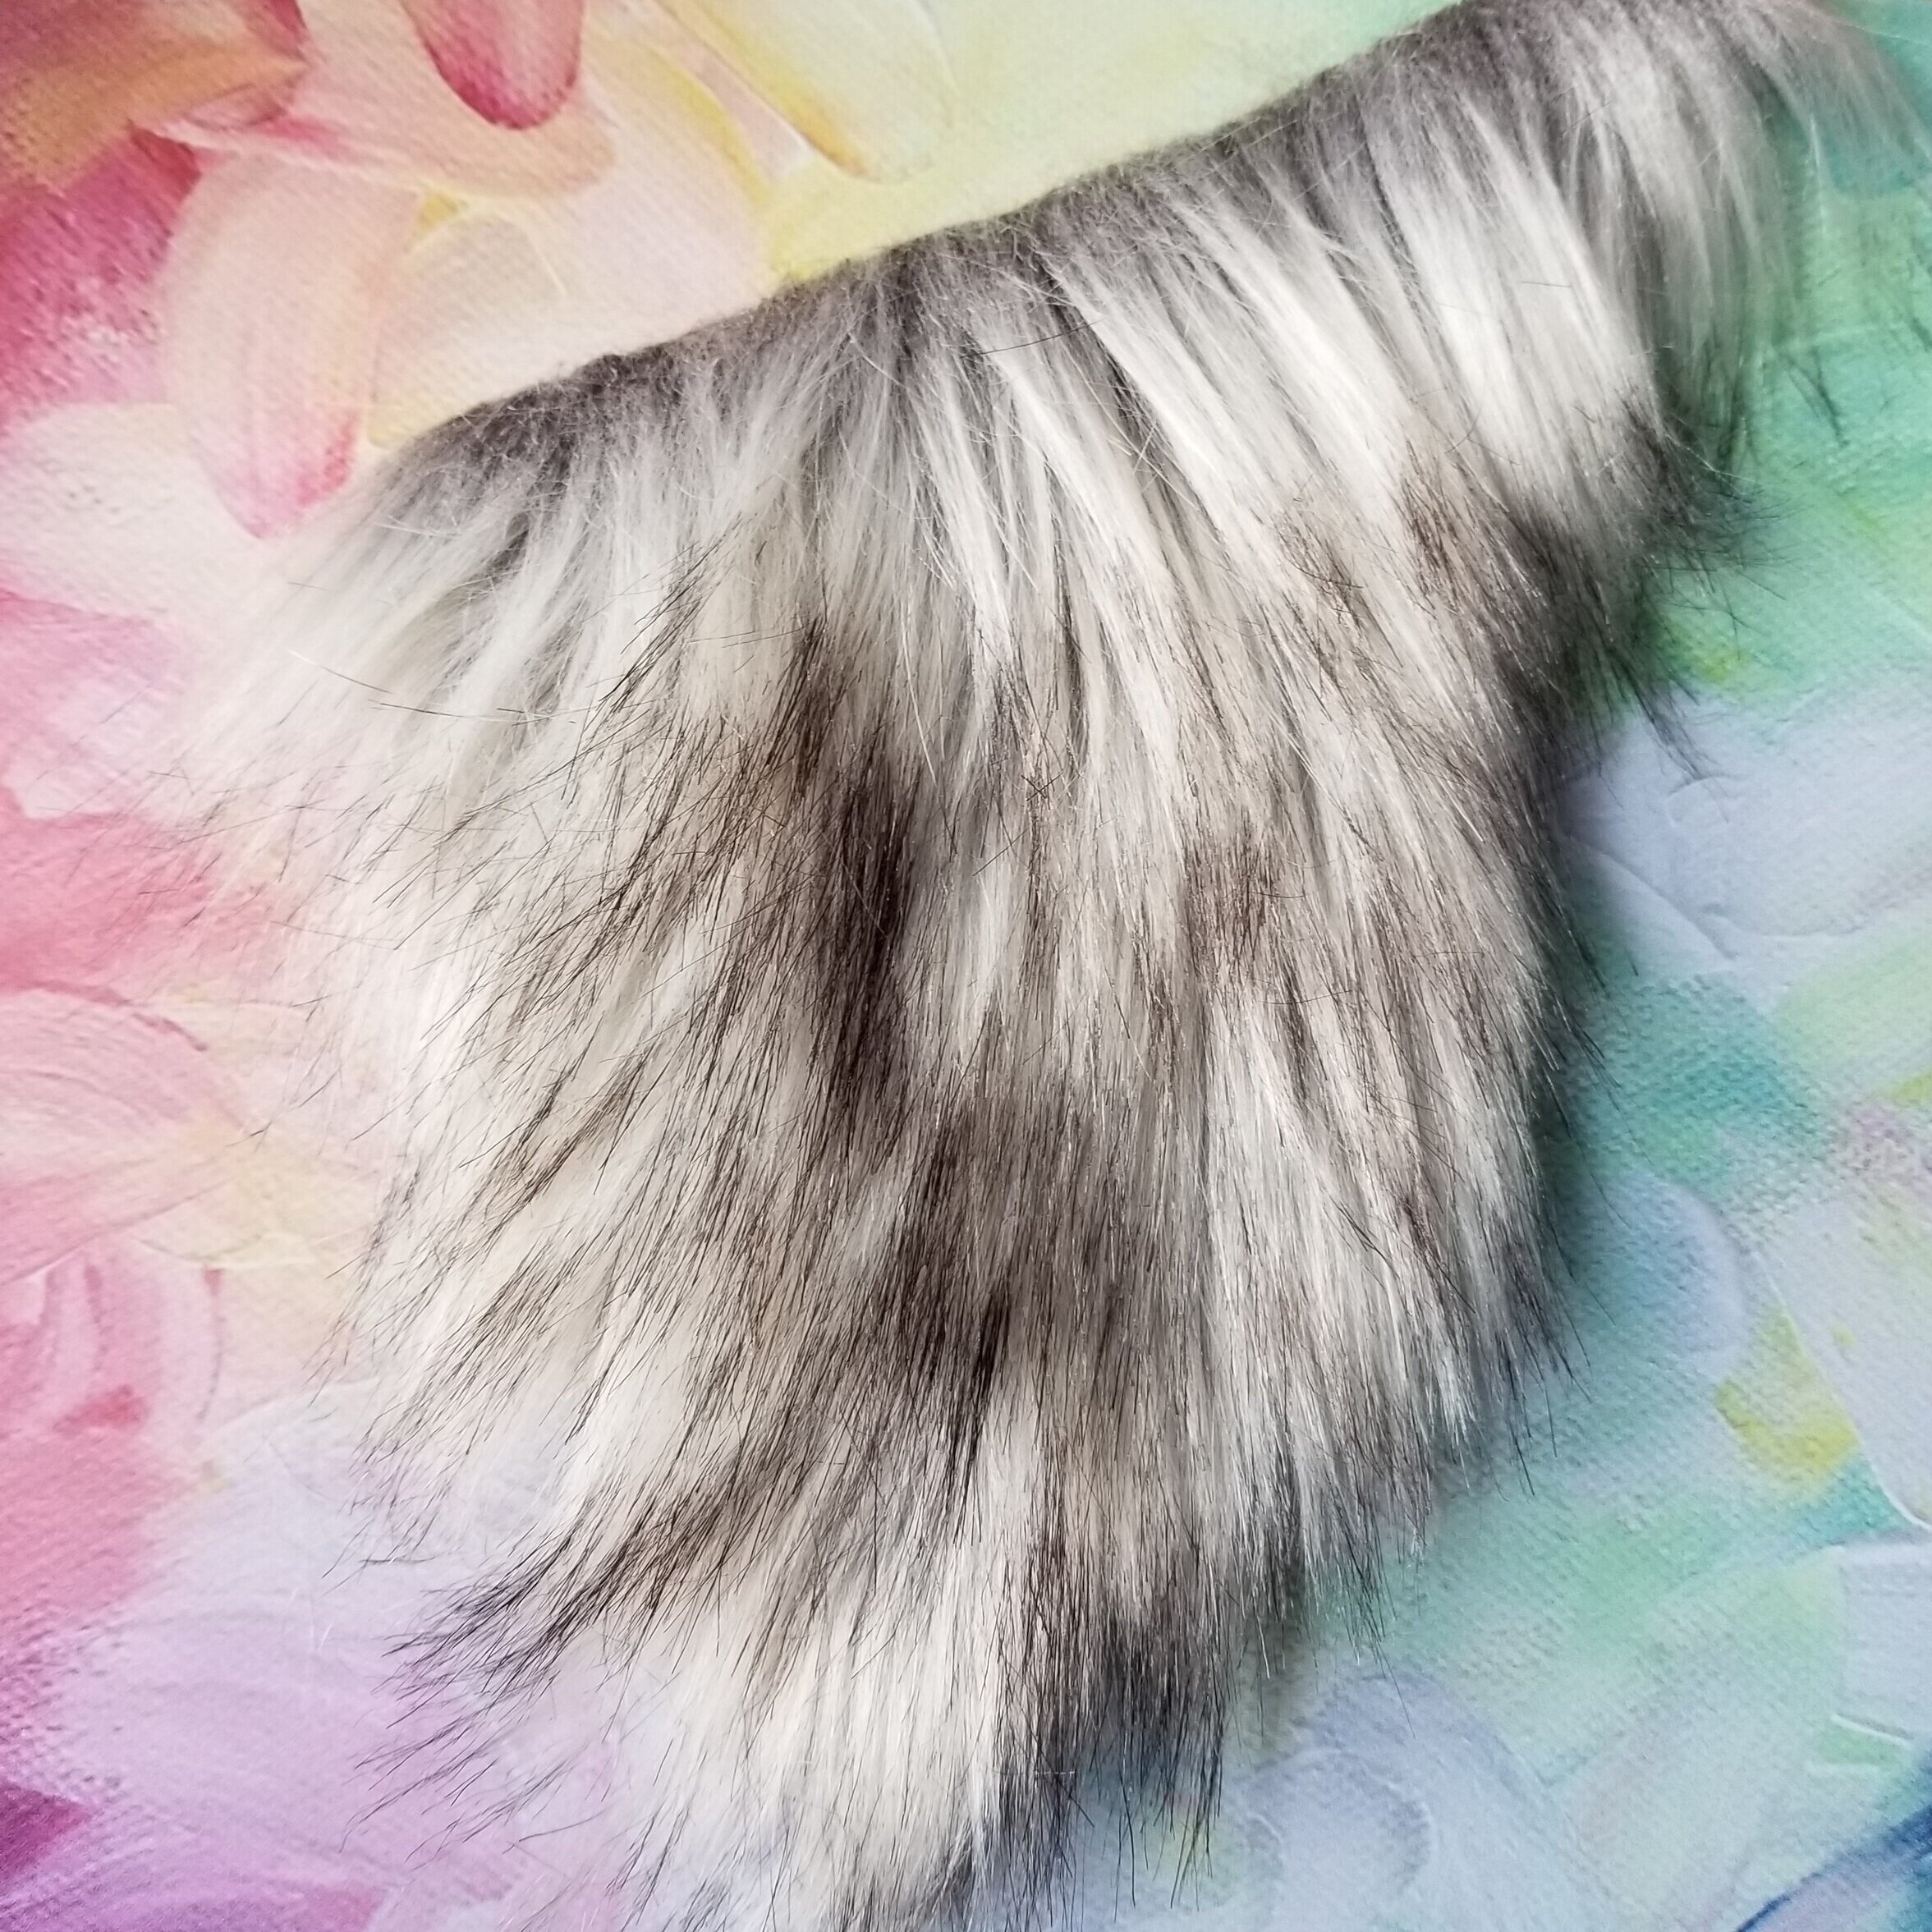 How to Make a Faux Fur Pom Pom DIY - Easy and Fast!